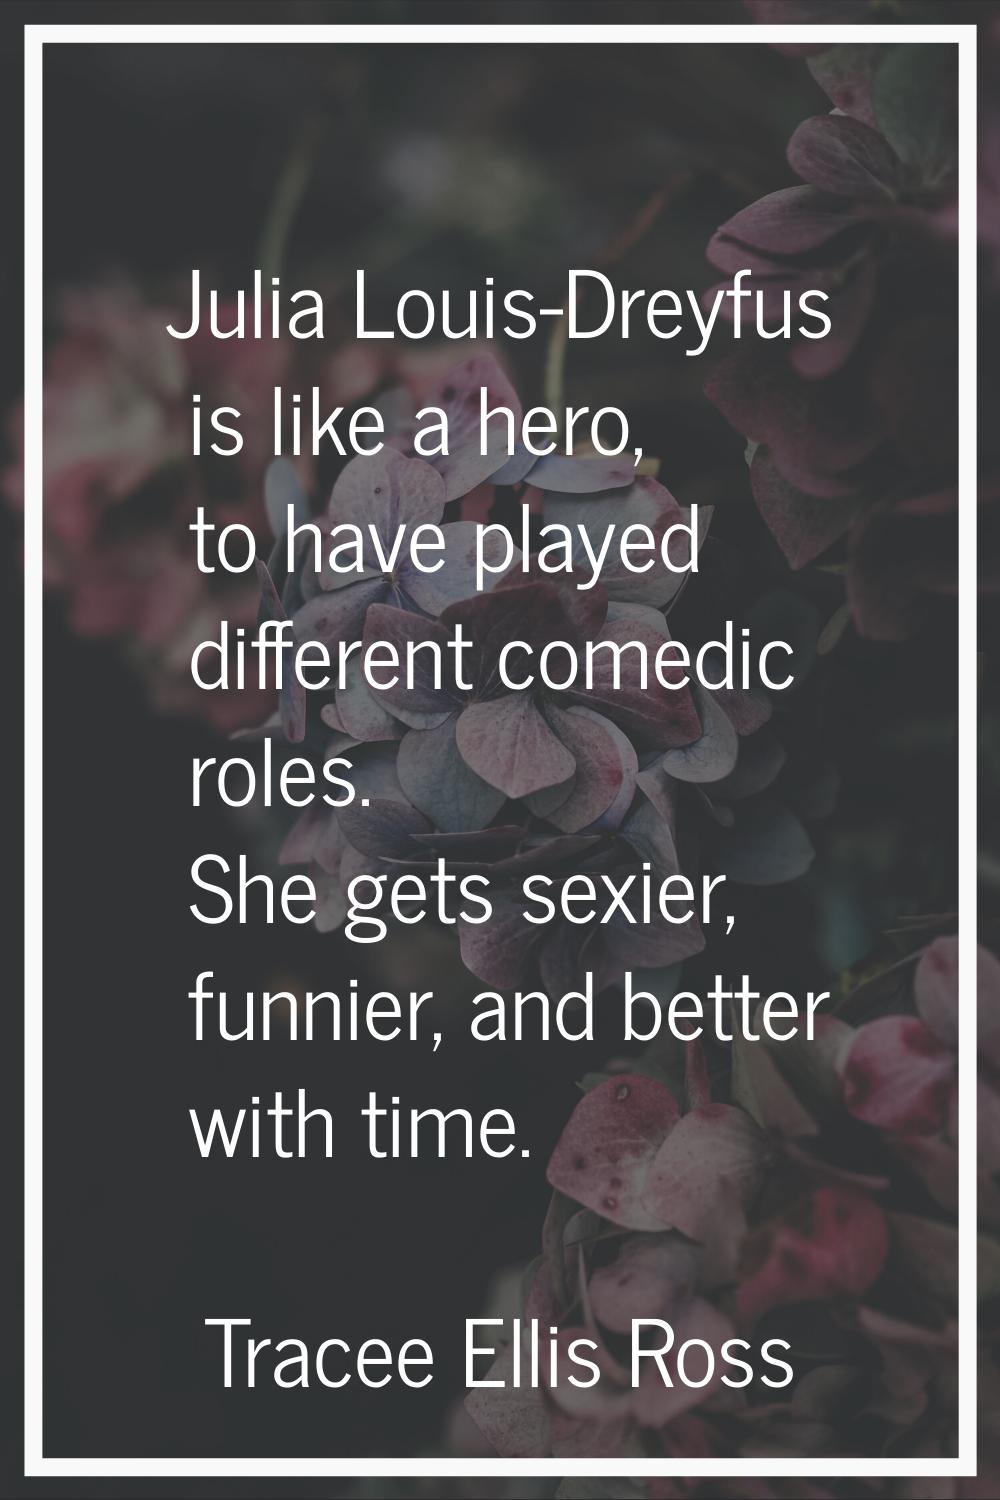 Julia Louis-Dreyfus is like a hero, to have played different comedic roles. She gets sexier, funnie